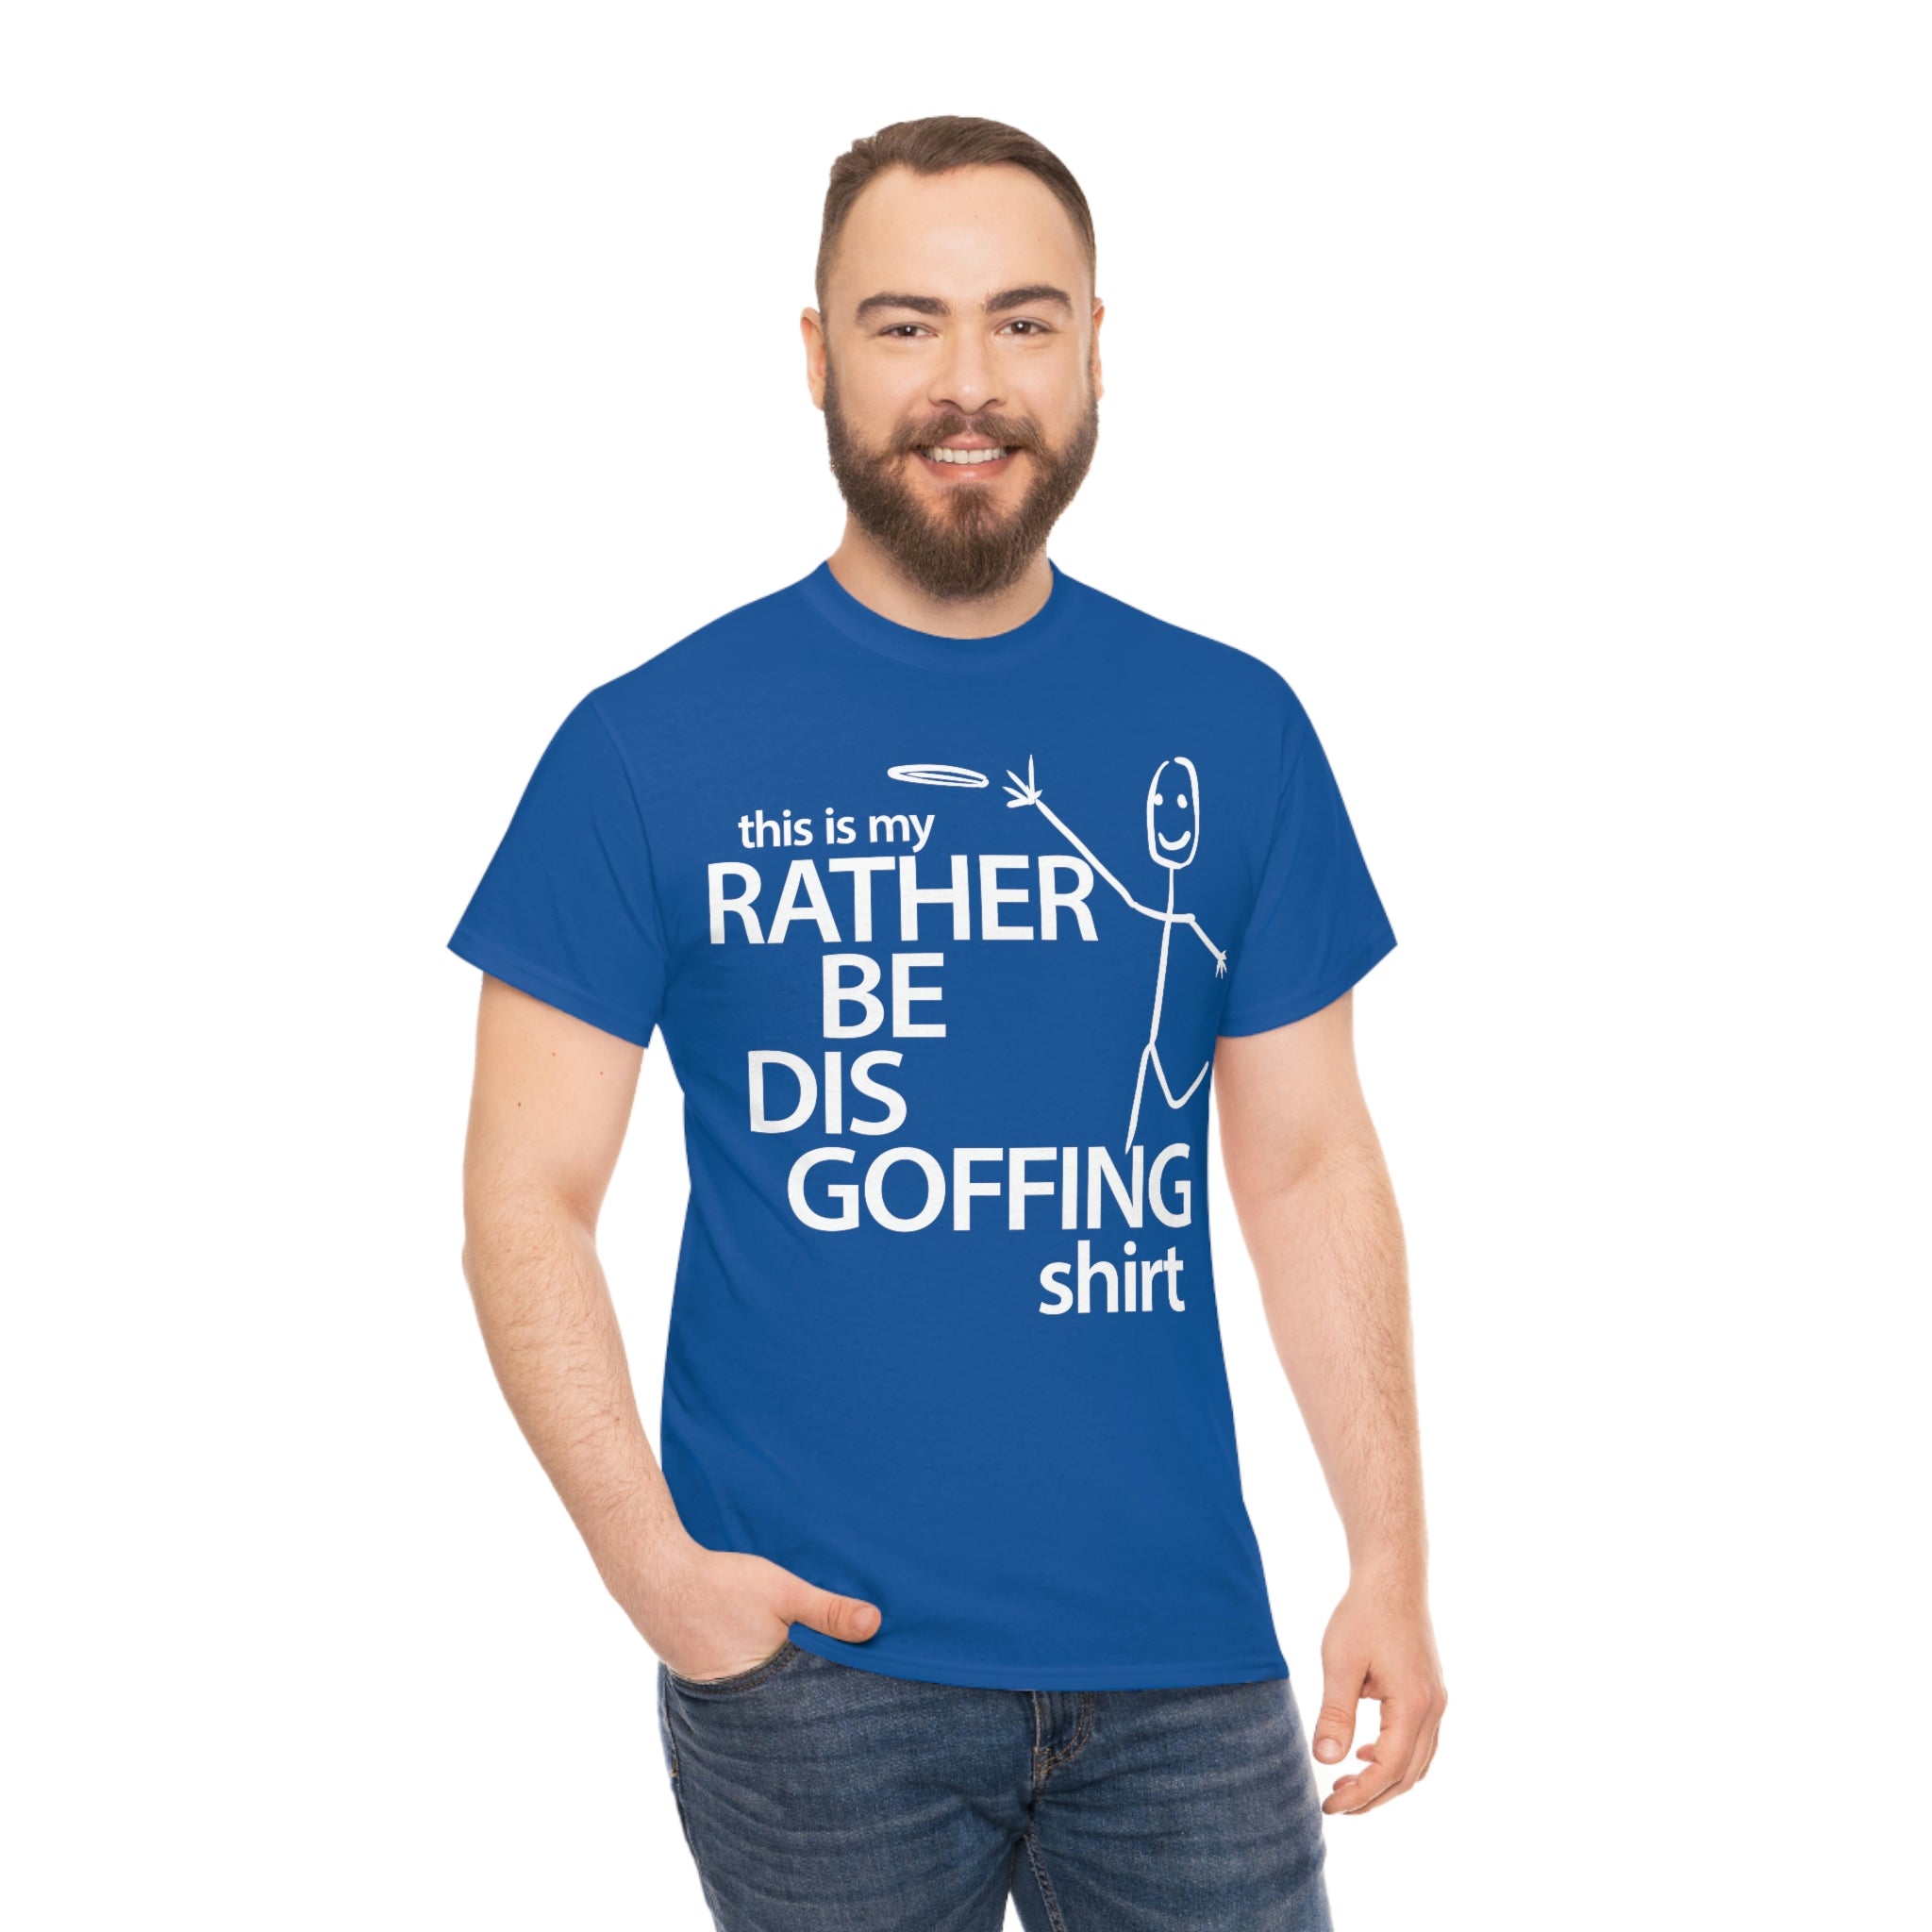 Rather Be Dis Goffing - Heavy Tee